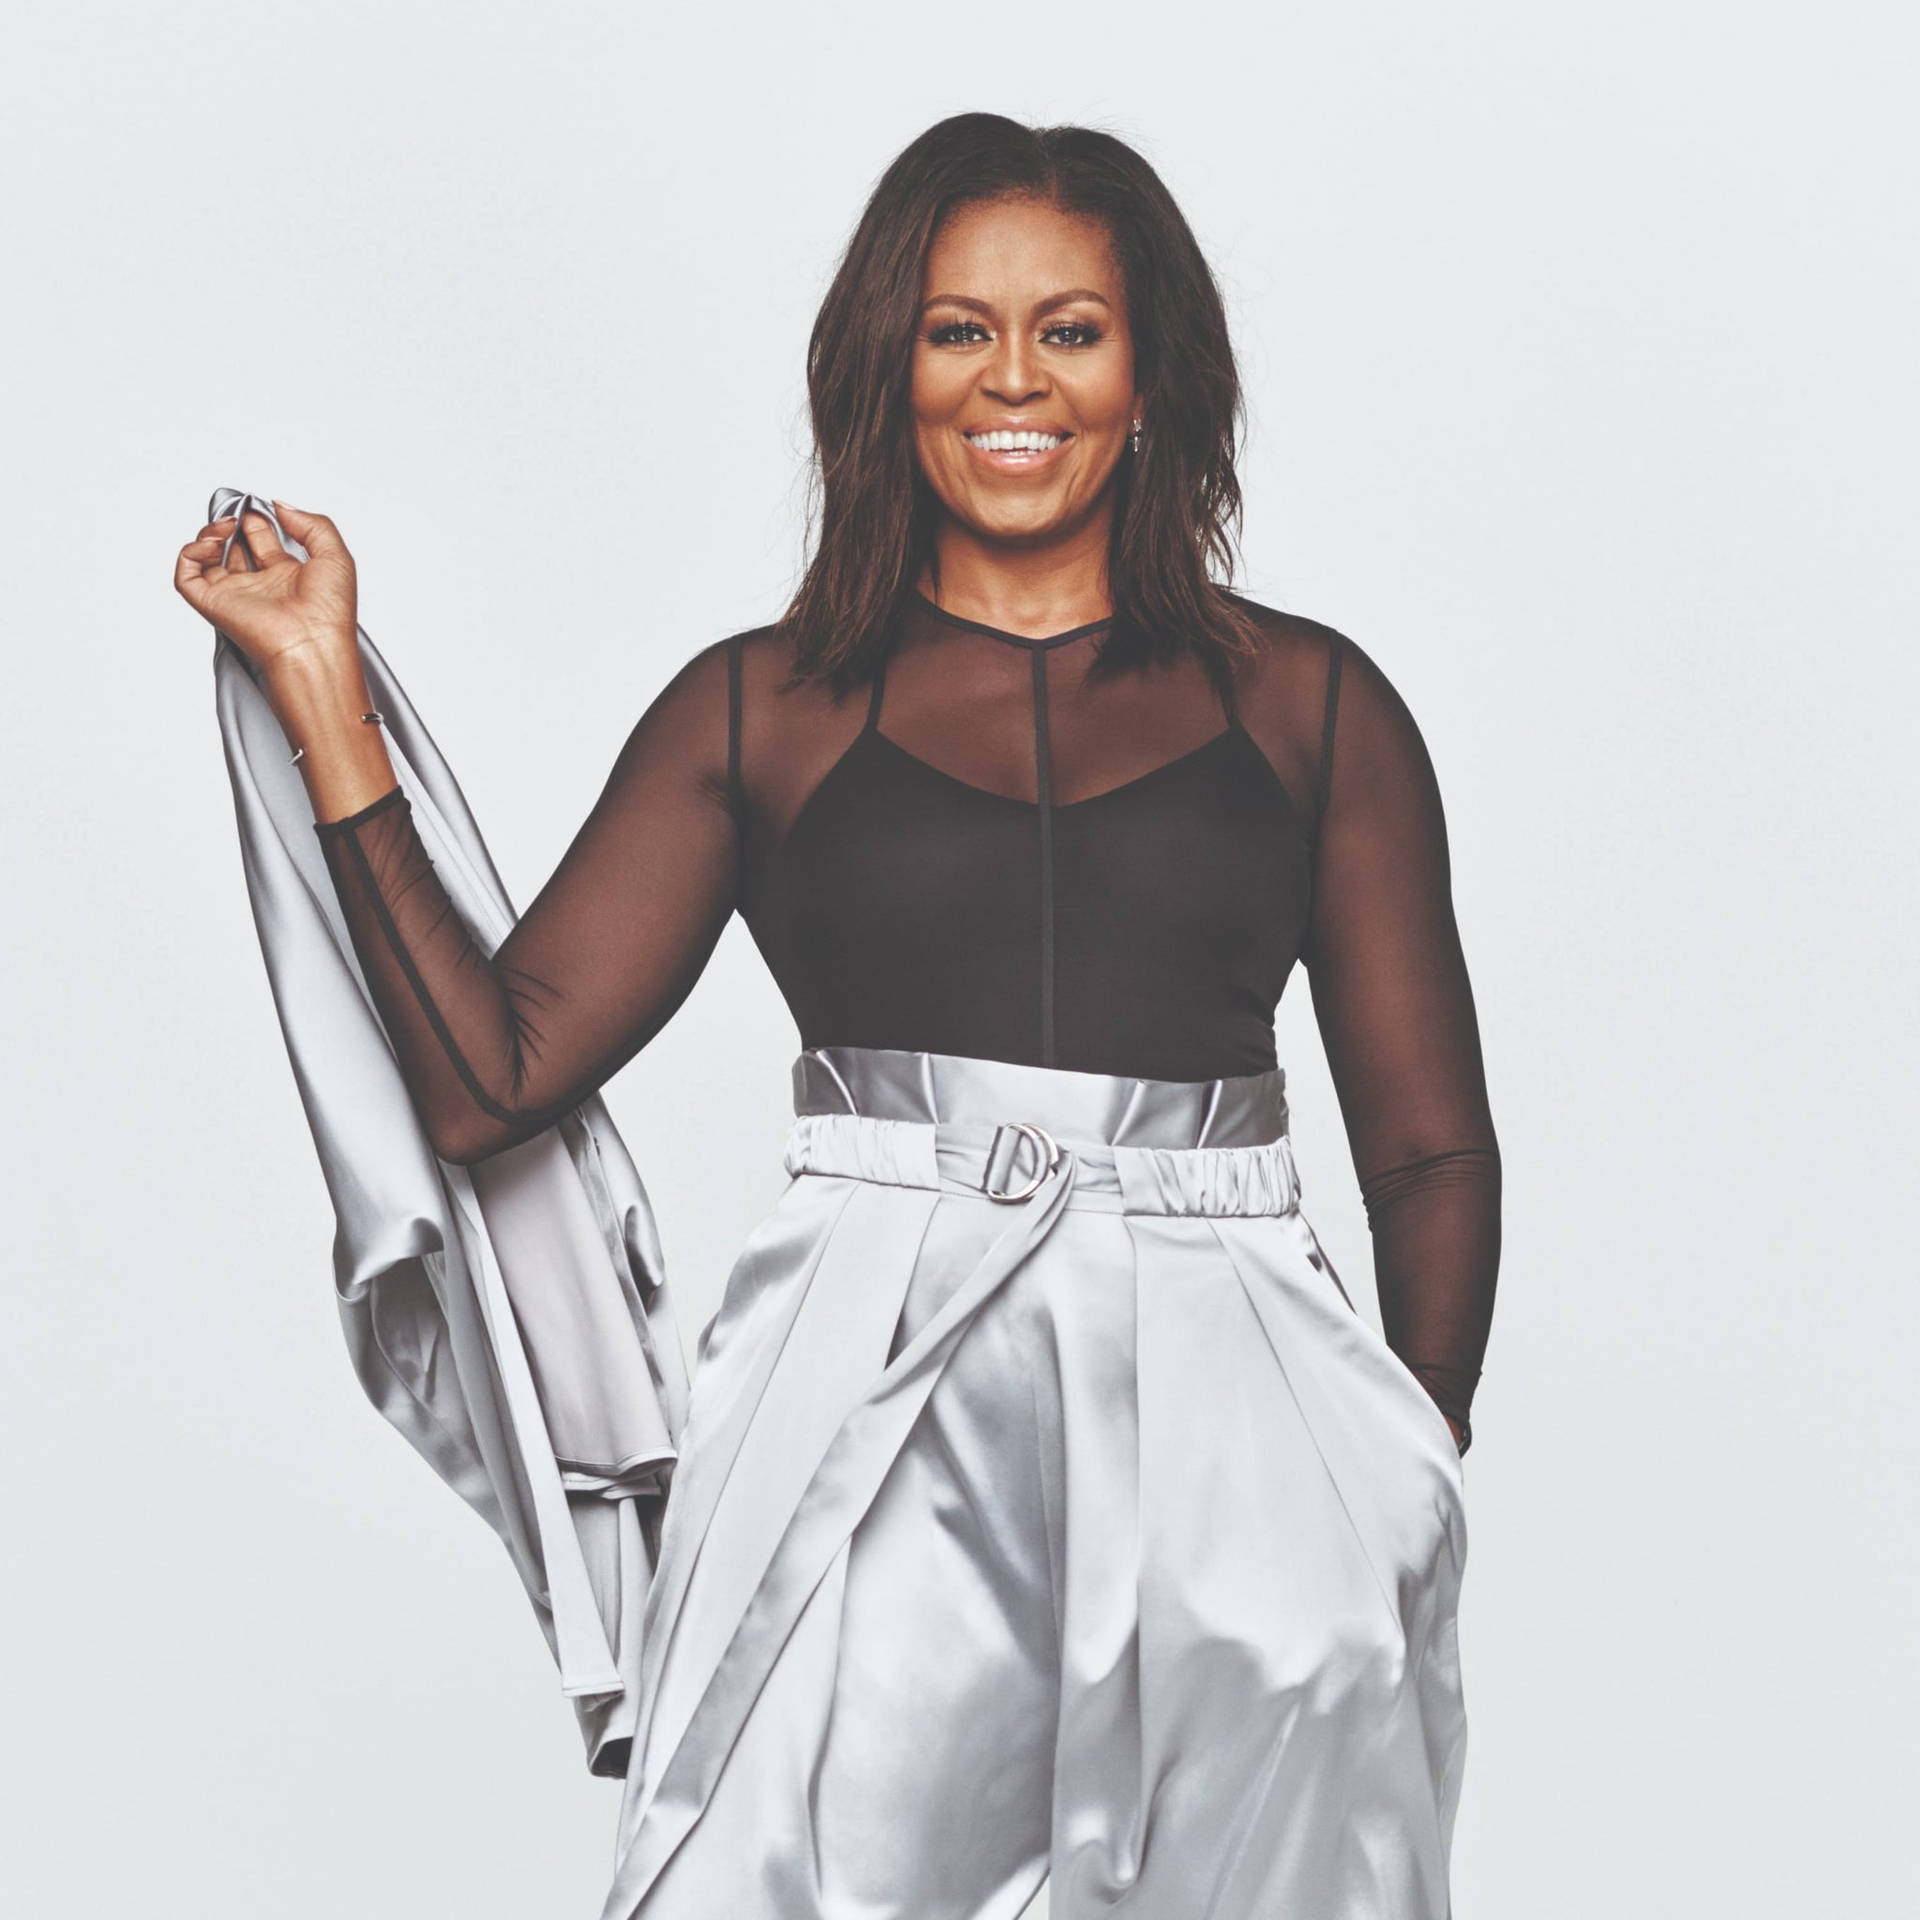 Michelle Obama In Sheer Top Wallpaper